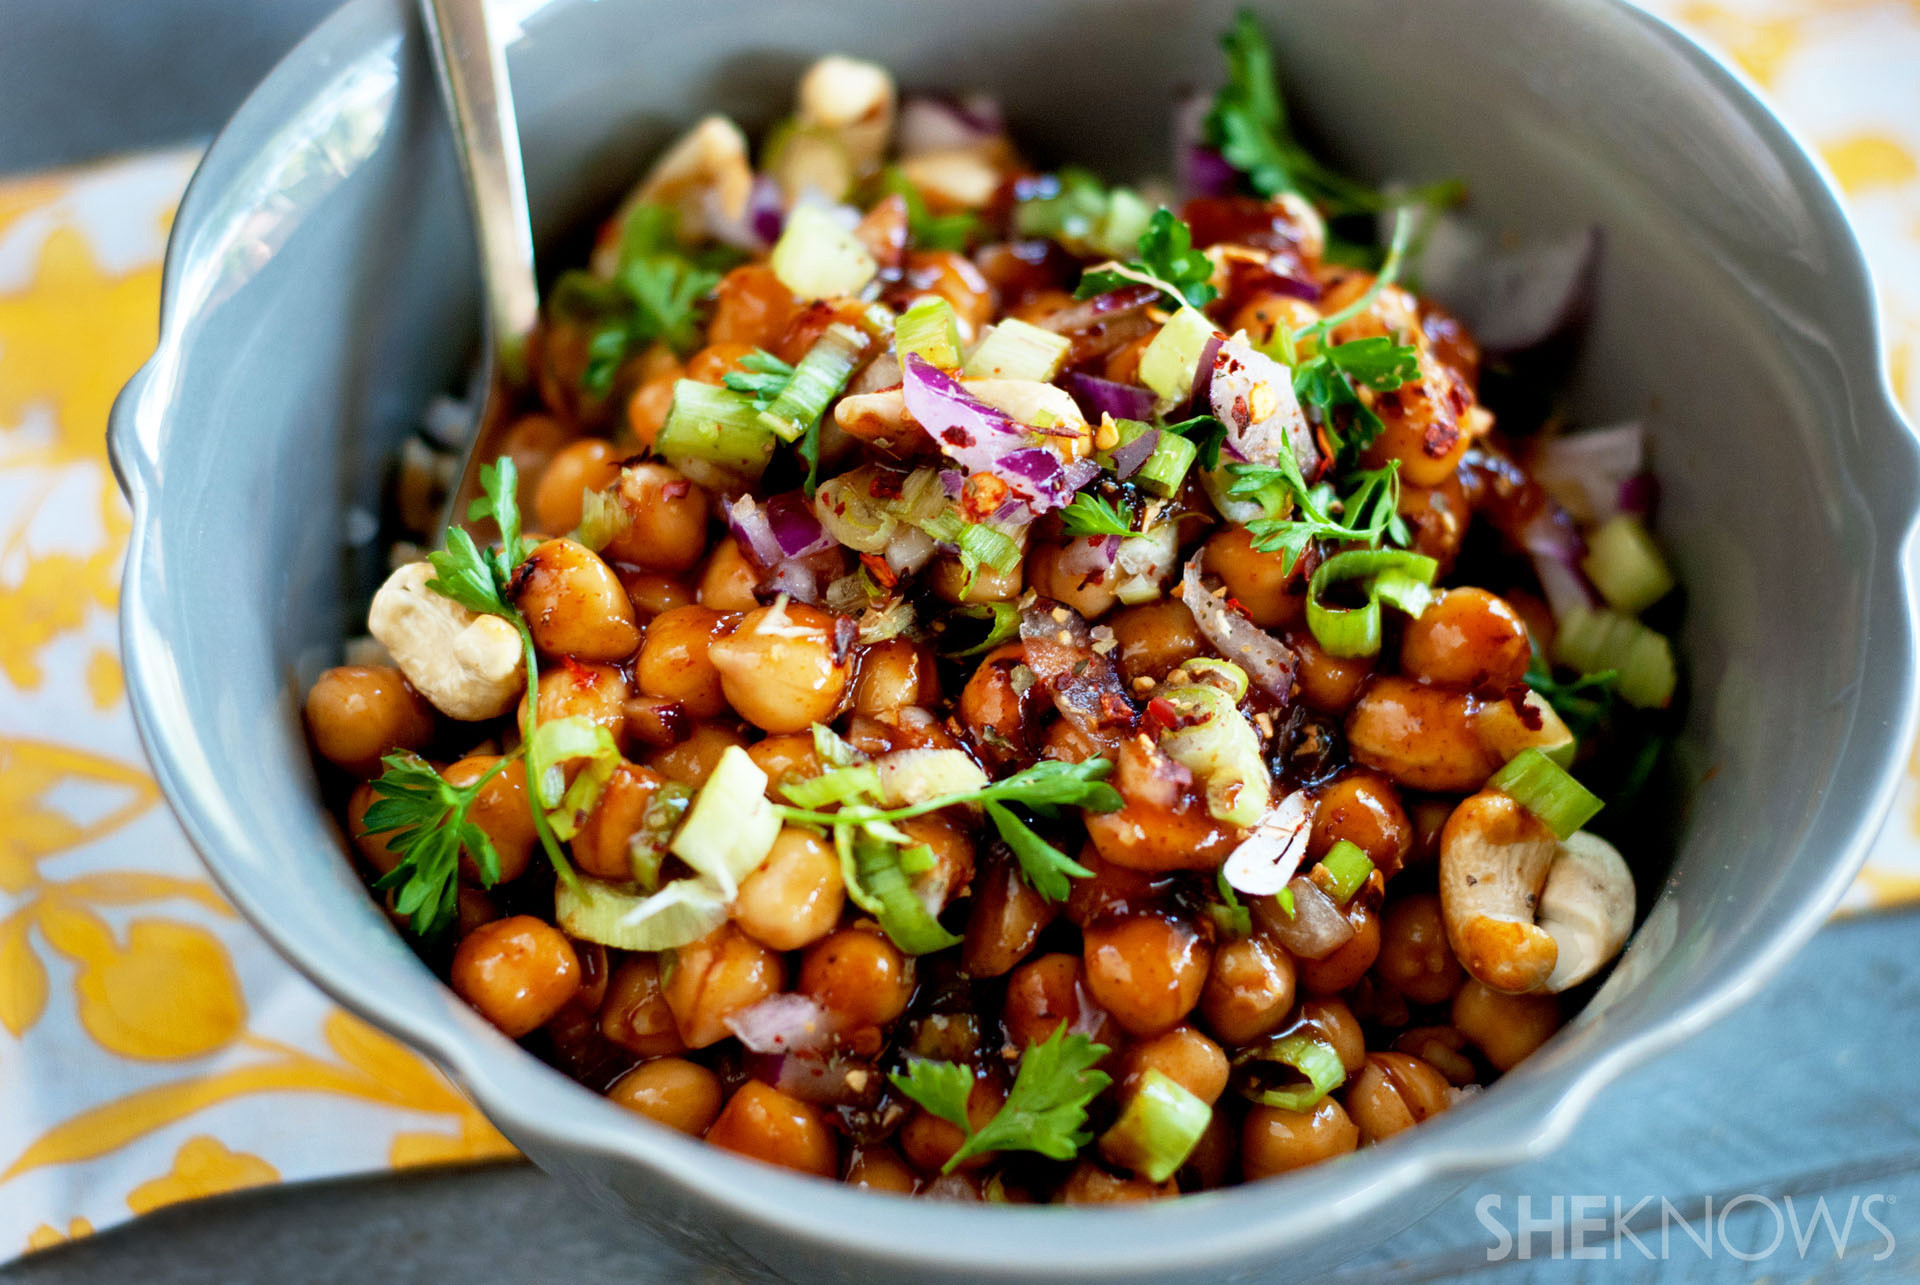 Vegan Chickpea Recipes
 Kung pao chickpeas Turn a favorite Chinese takeout dish vegan